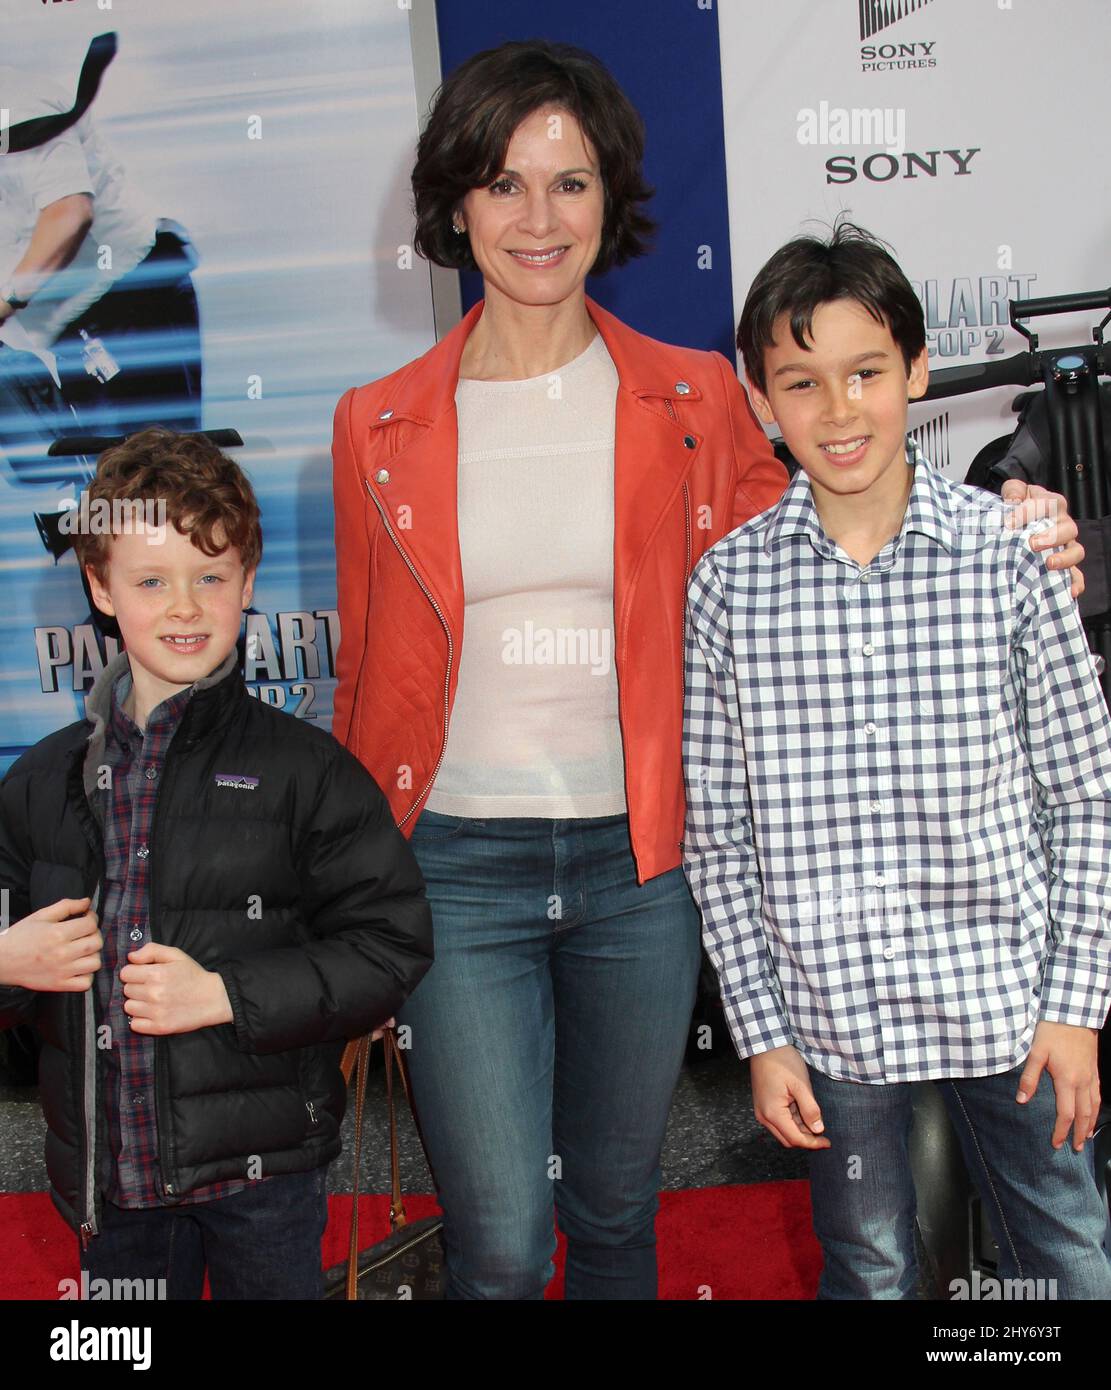 Elizabeth Vargas attending the 'Paul Blart: Mall Cop 2' held at the AMC Loews Lincoln Square Theater in New York, USA. Stock Photo